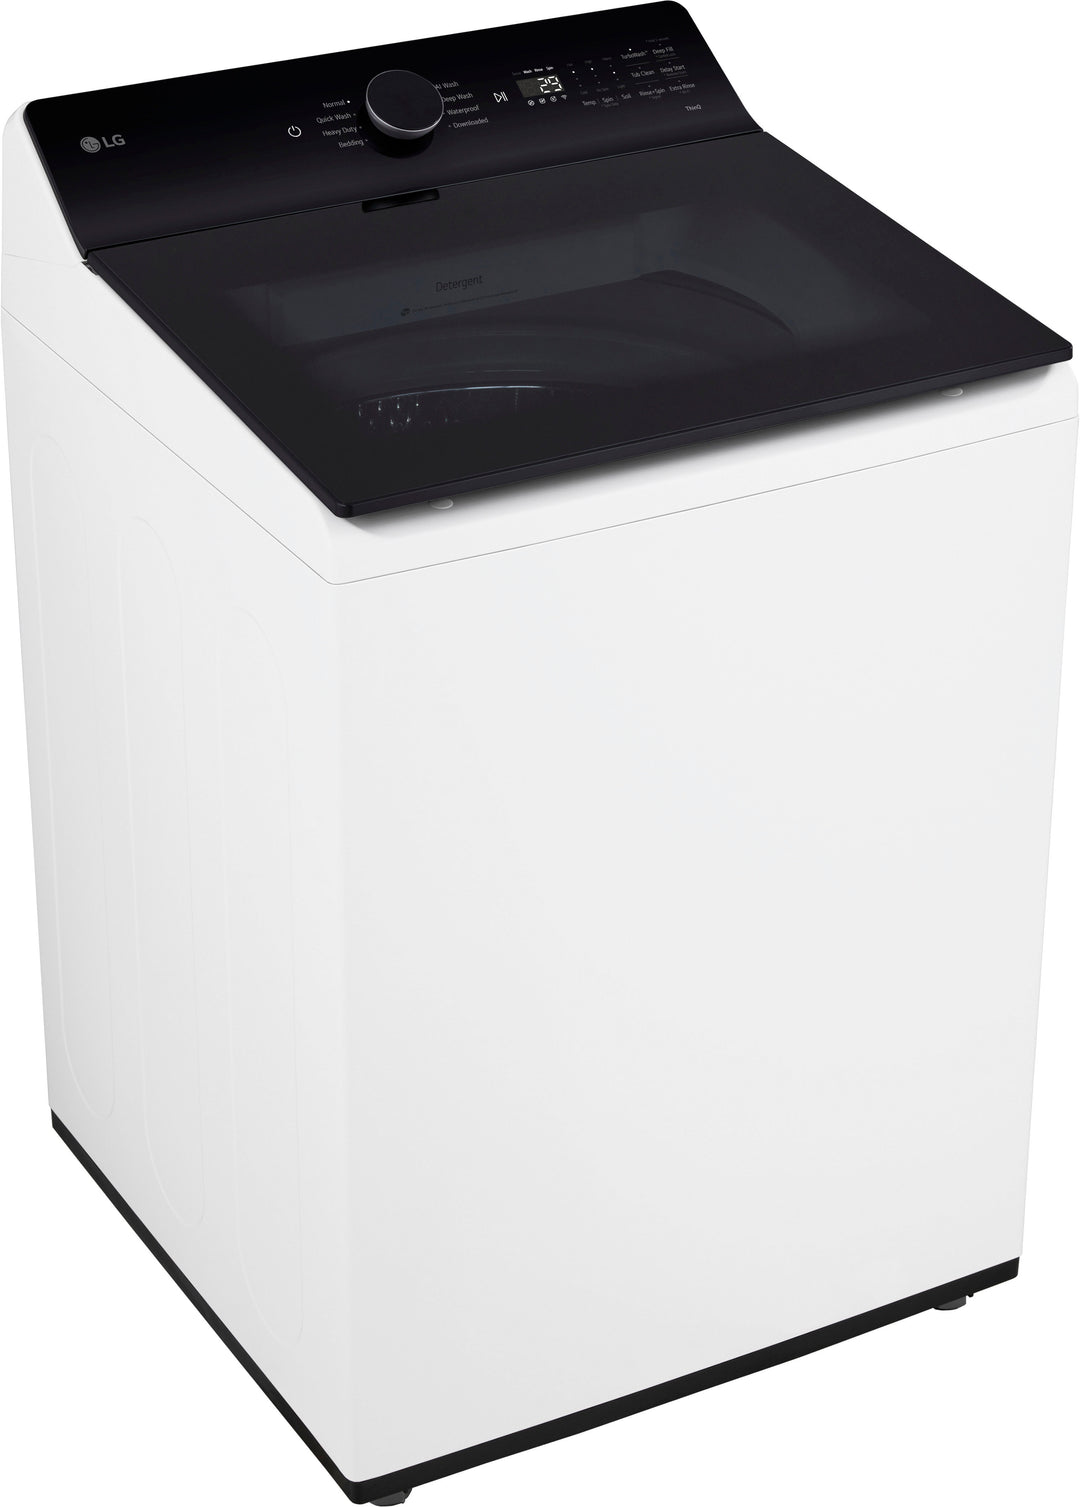 LG - 5.5 Cu. Ft. High Efficiency Smart Top Load Washer with EasyUnload - Alpine White_4